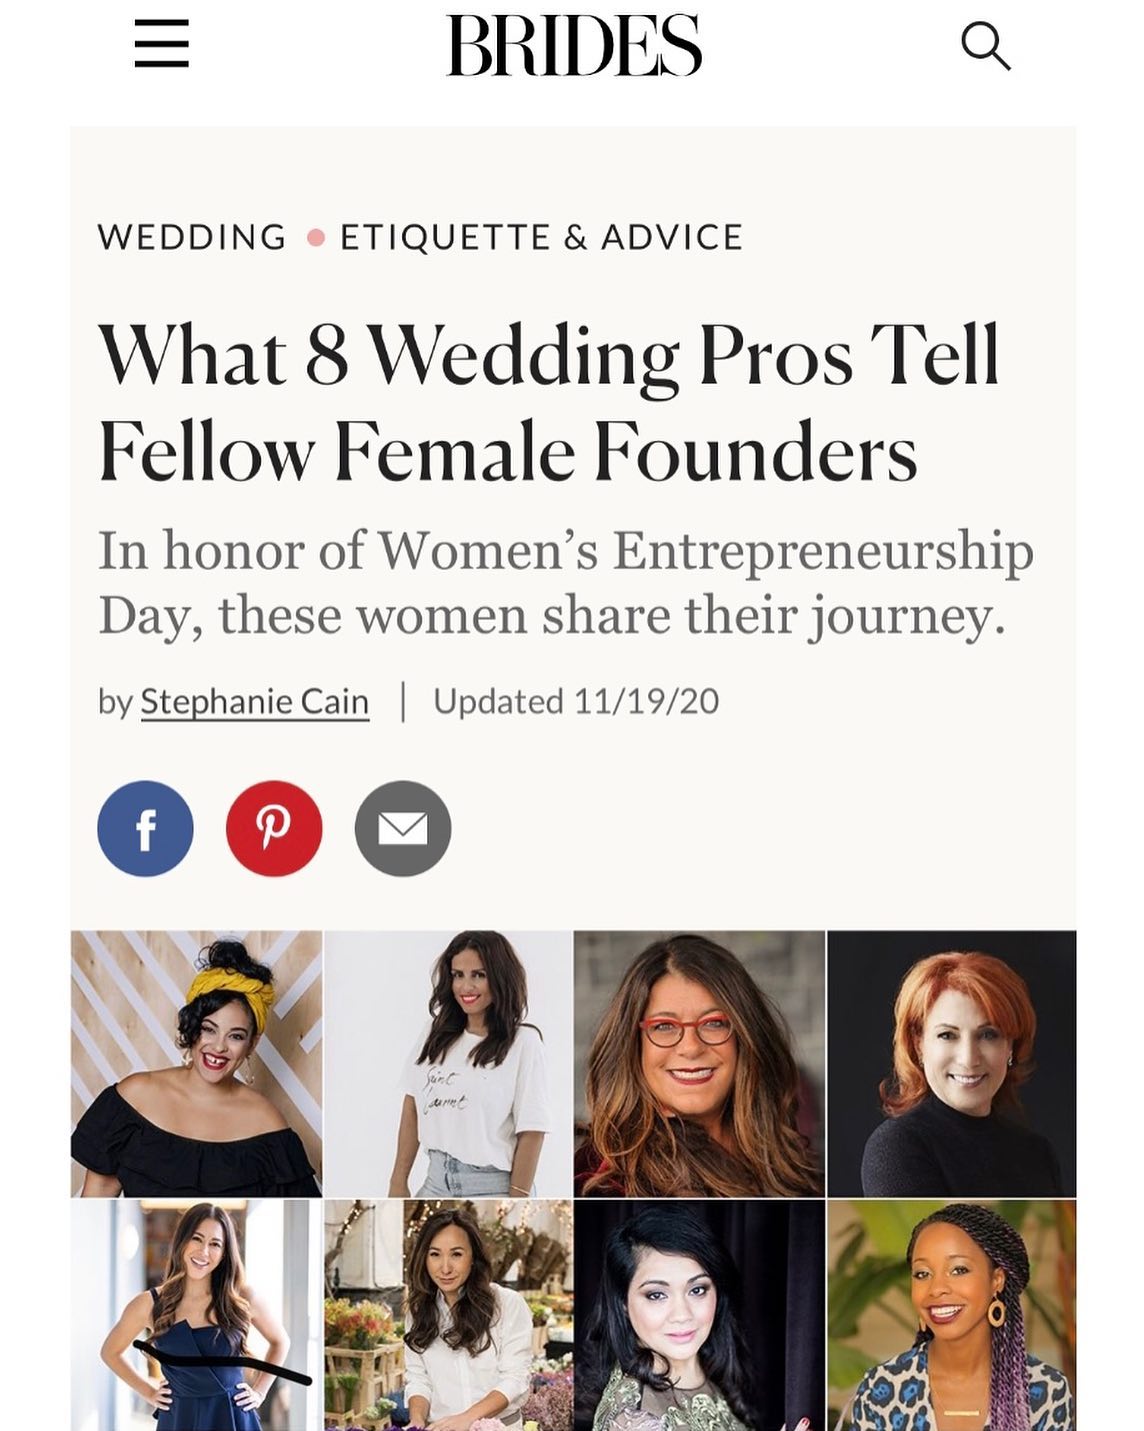 Honored to be in such great company!! Happy to these amazing ladies as well as all the other making waves. ?? 

Link in stories 
Thanks @brides @stephncain